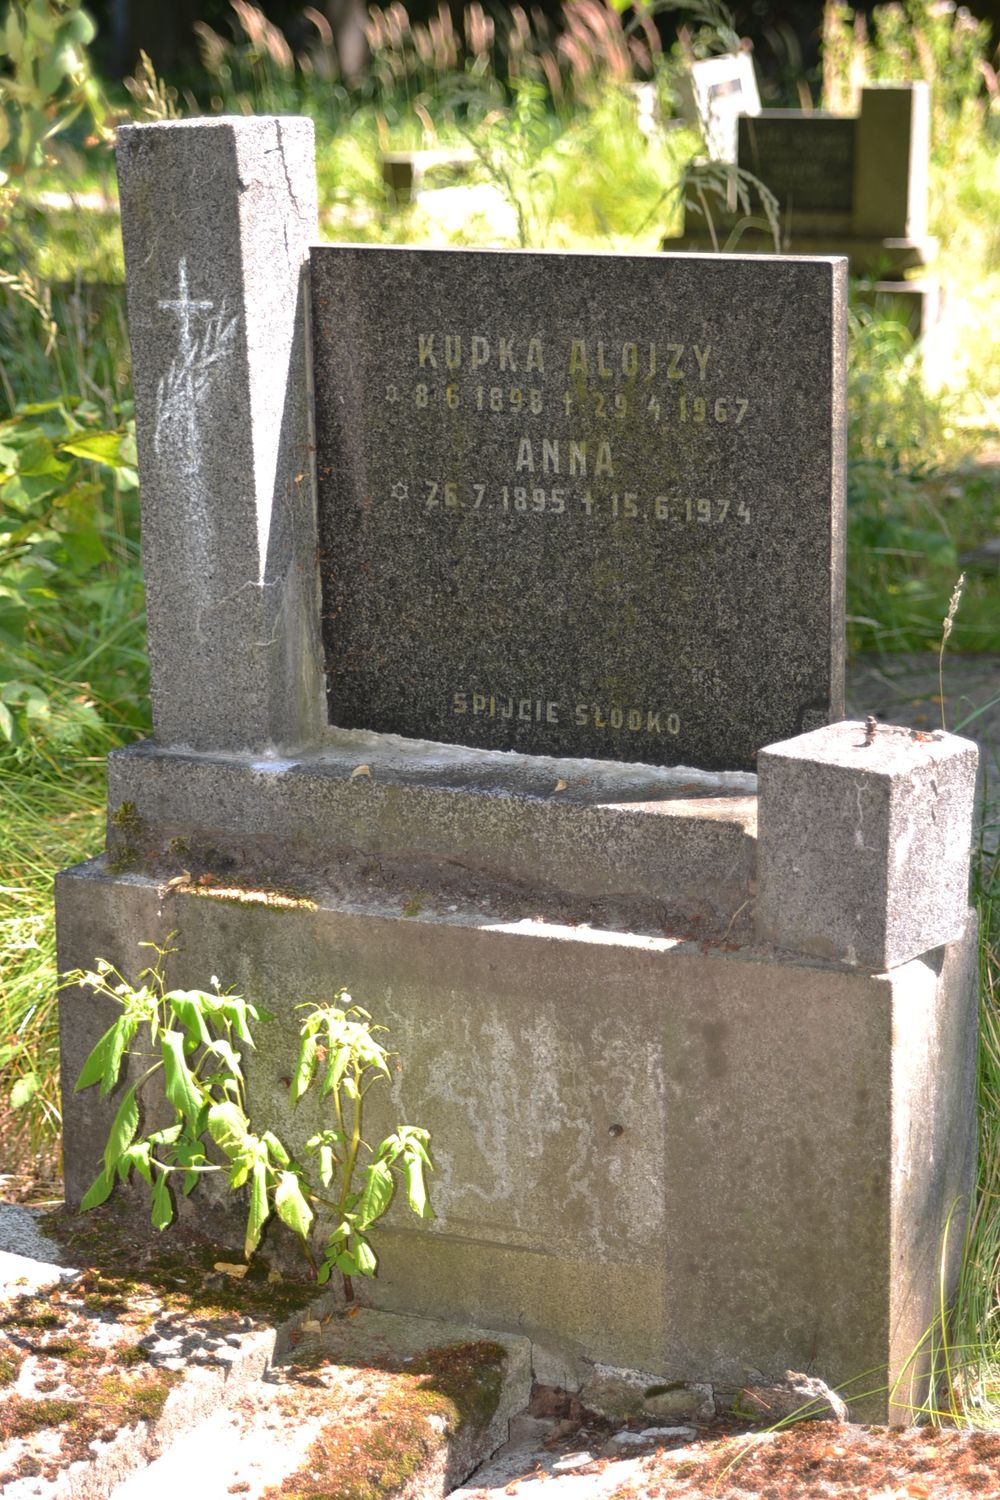 Inscription plaque from the tomb of Aloise and Anna Kupka, cemetery in Karviná Mexico, Czech Republic, as of 2022